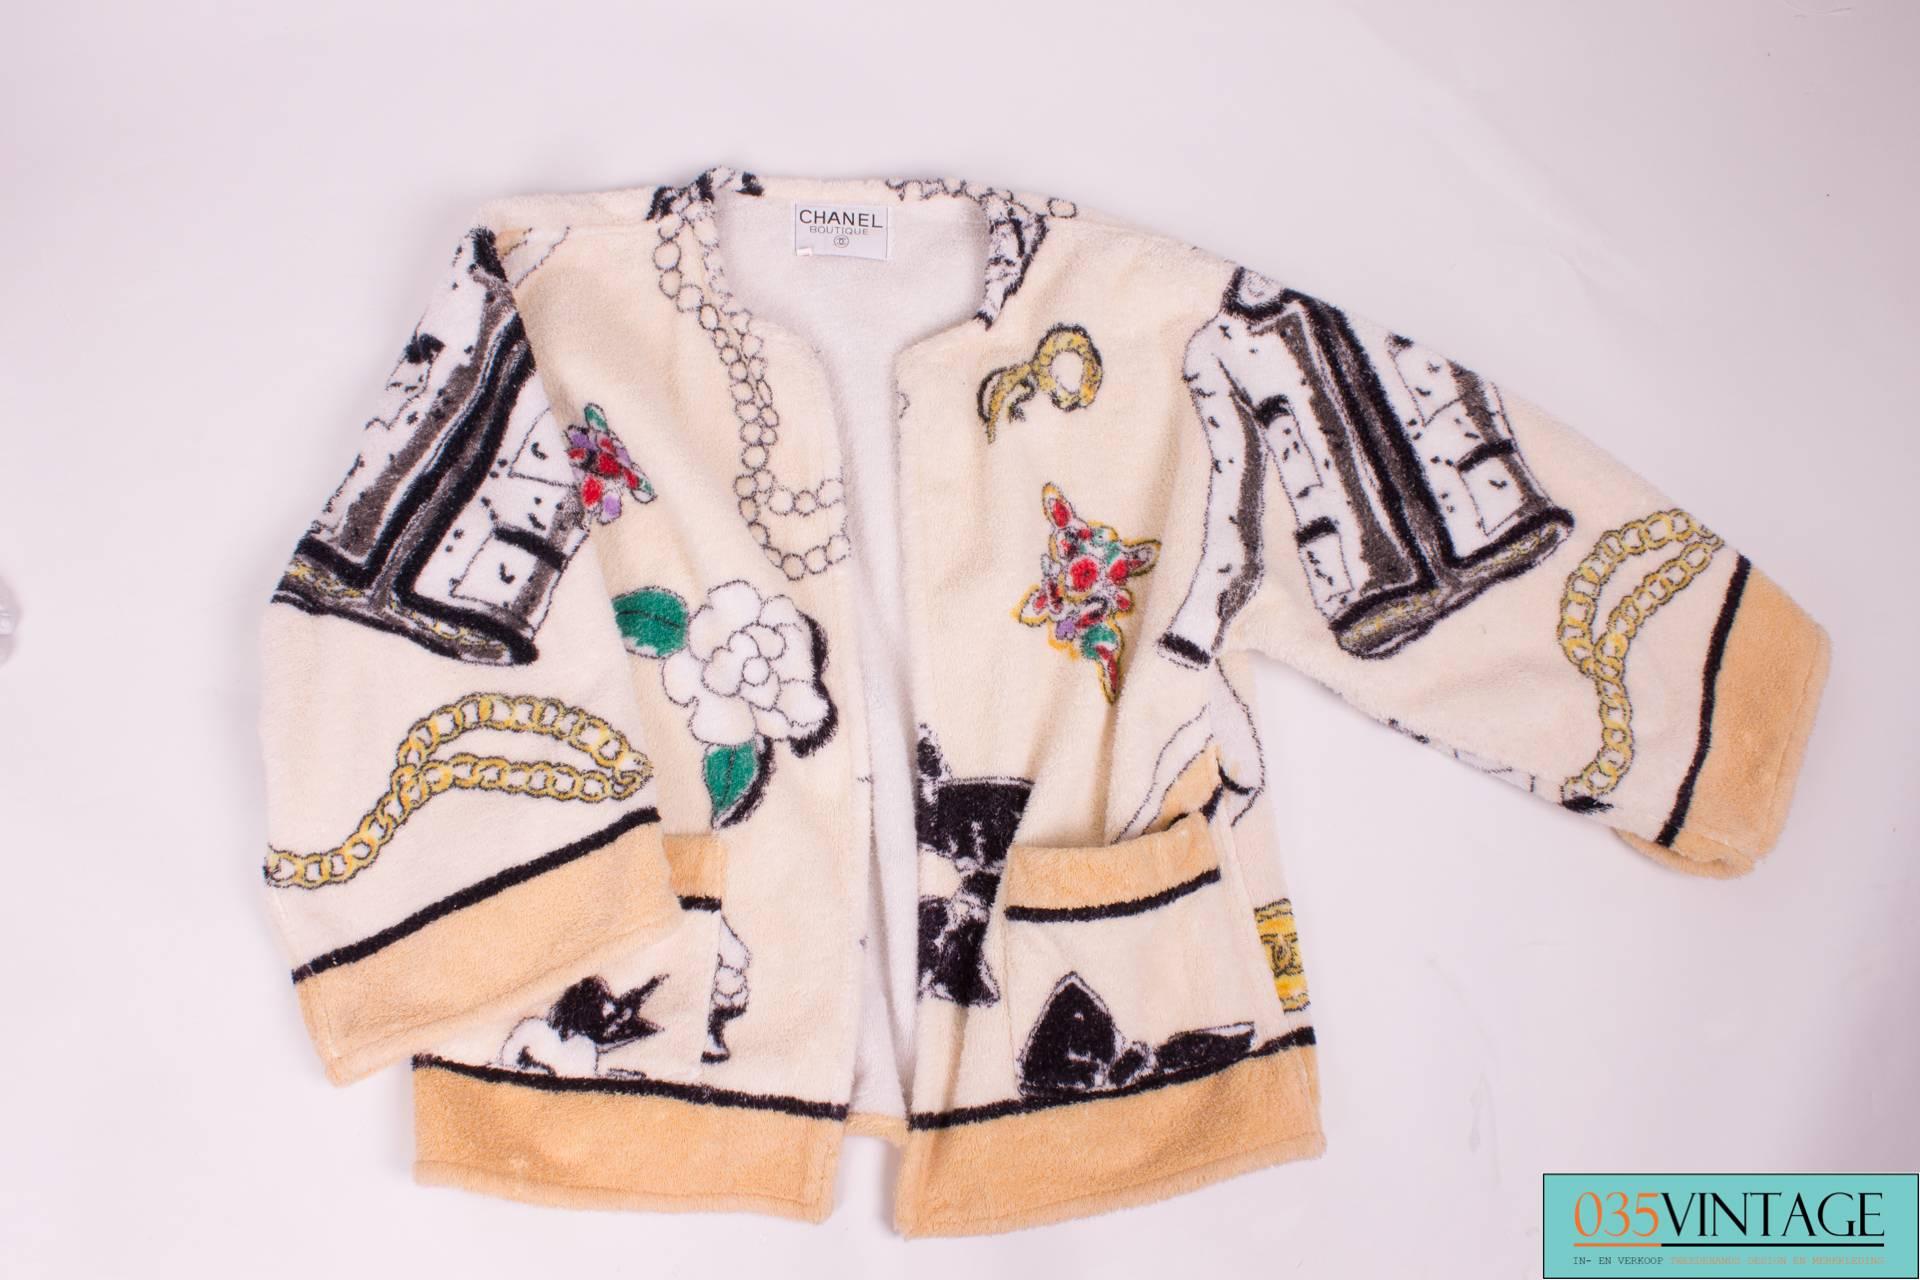 Lovely little bathrobe by Chanel from 1994; real vintage!

The white terry cloth jacket has an all-over print in black, yellow, red, purple, green, gray and beige with a hat, big bow, brooch, pumps, chains, bags and of course the famous camellia